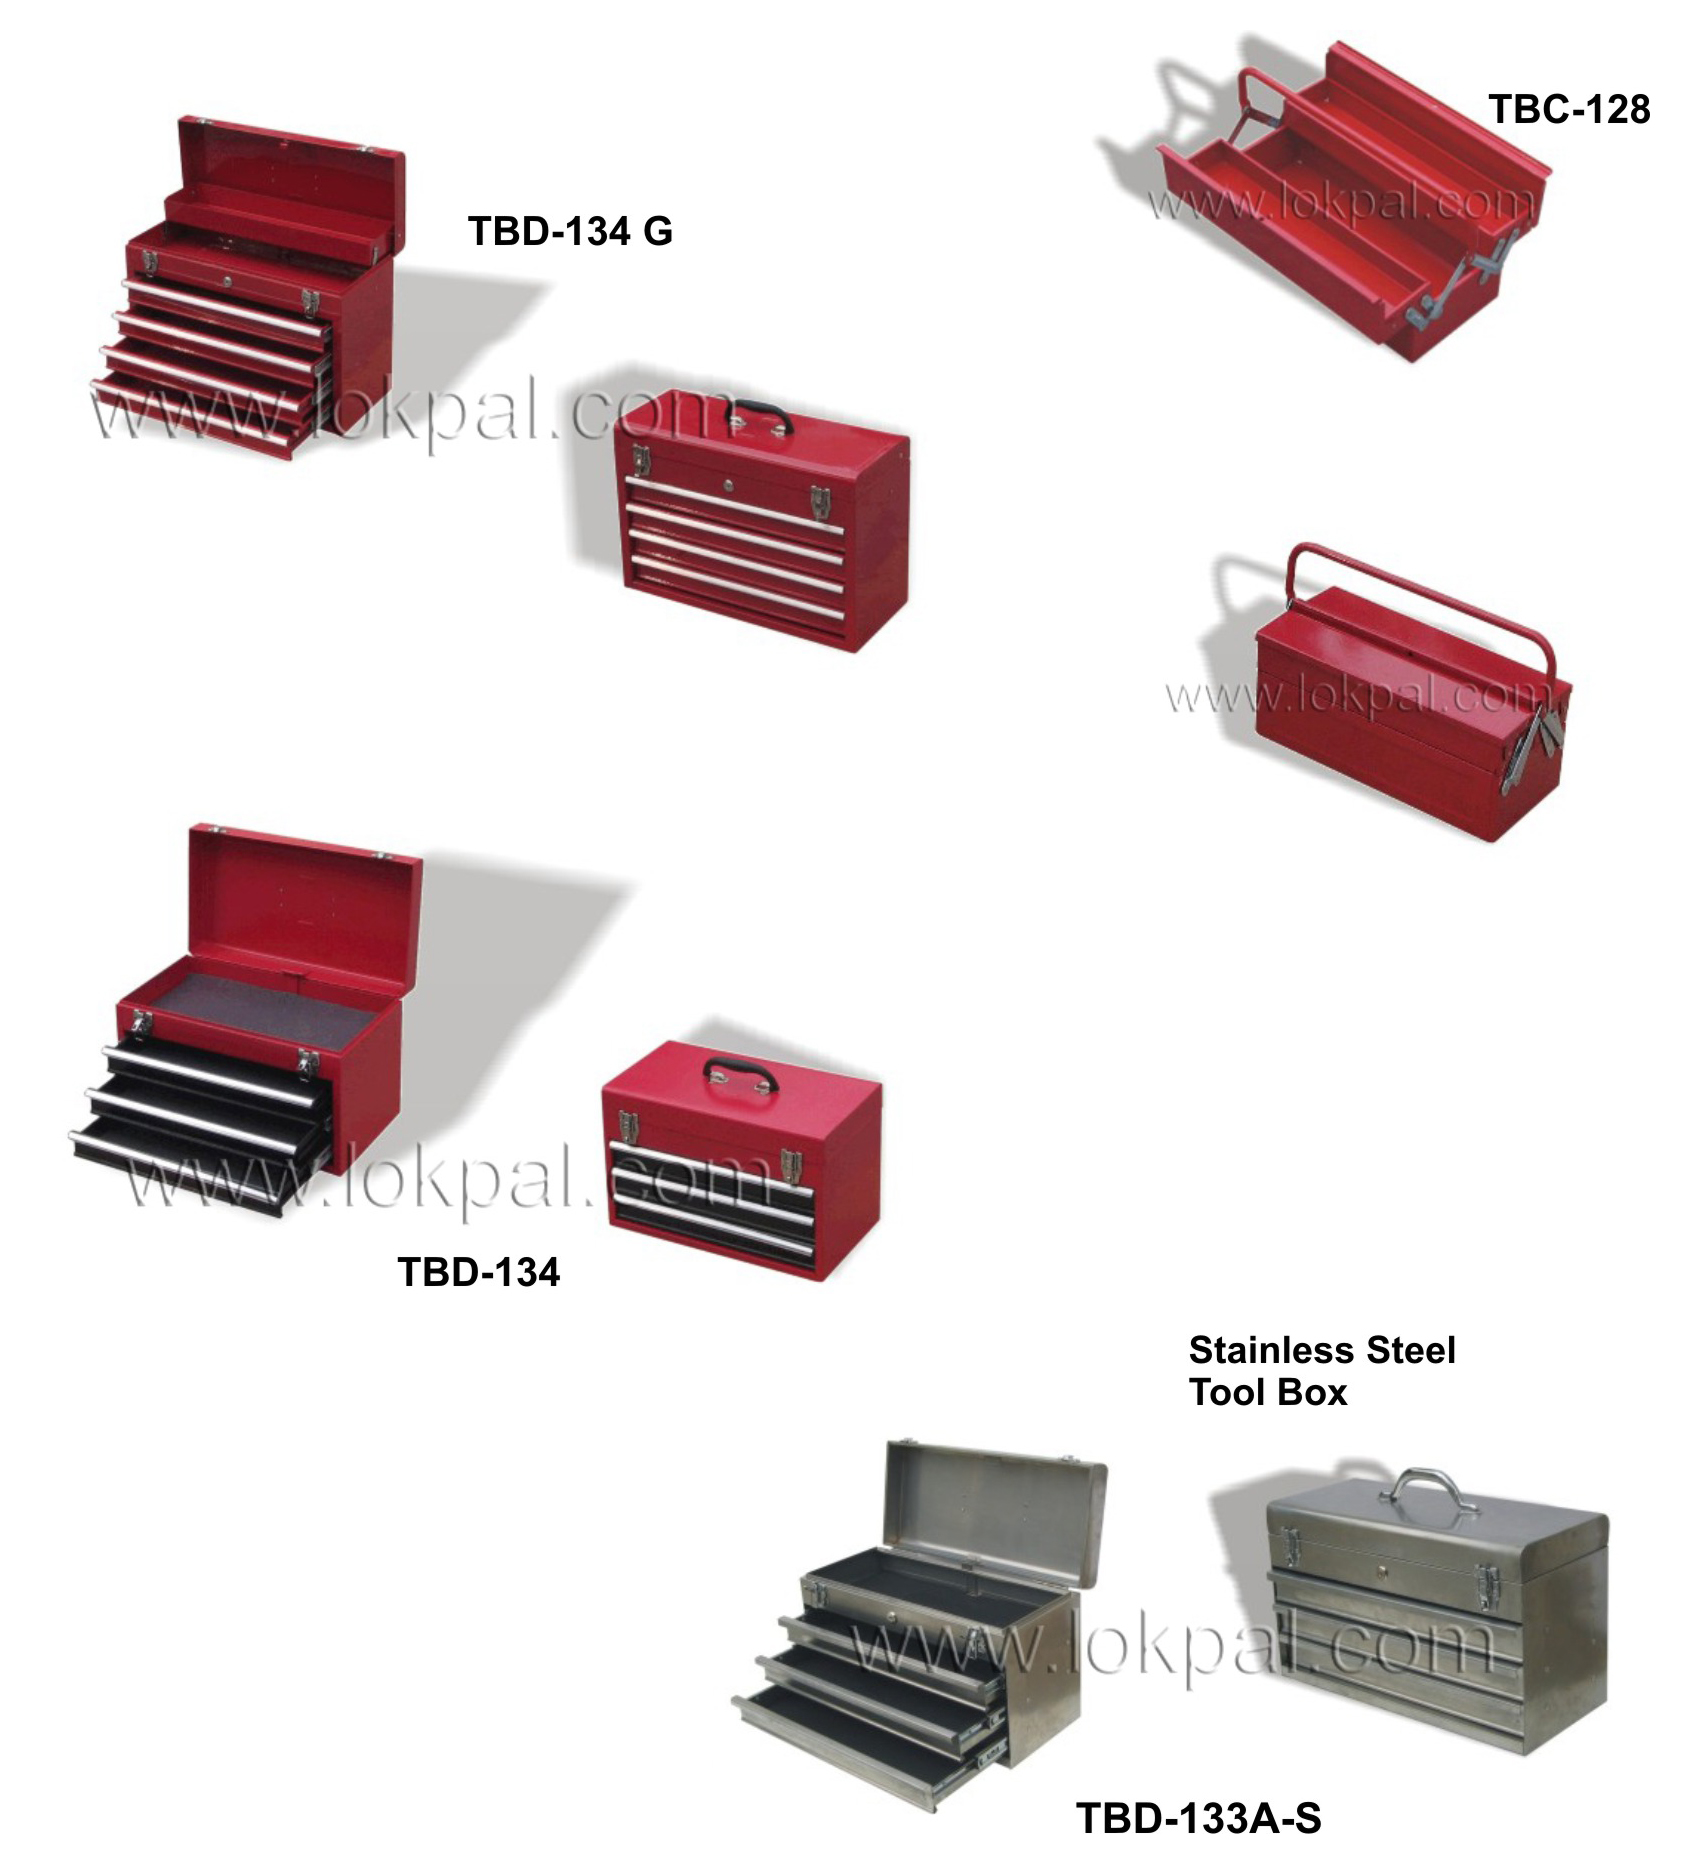 Tool Boxes,Stainless Steel Tool Boxes, Manufacturer, Supplier, Delhi NCR, Noida, India